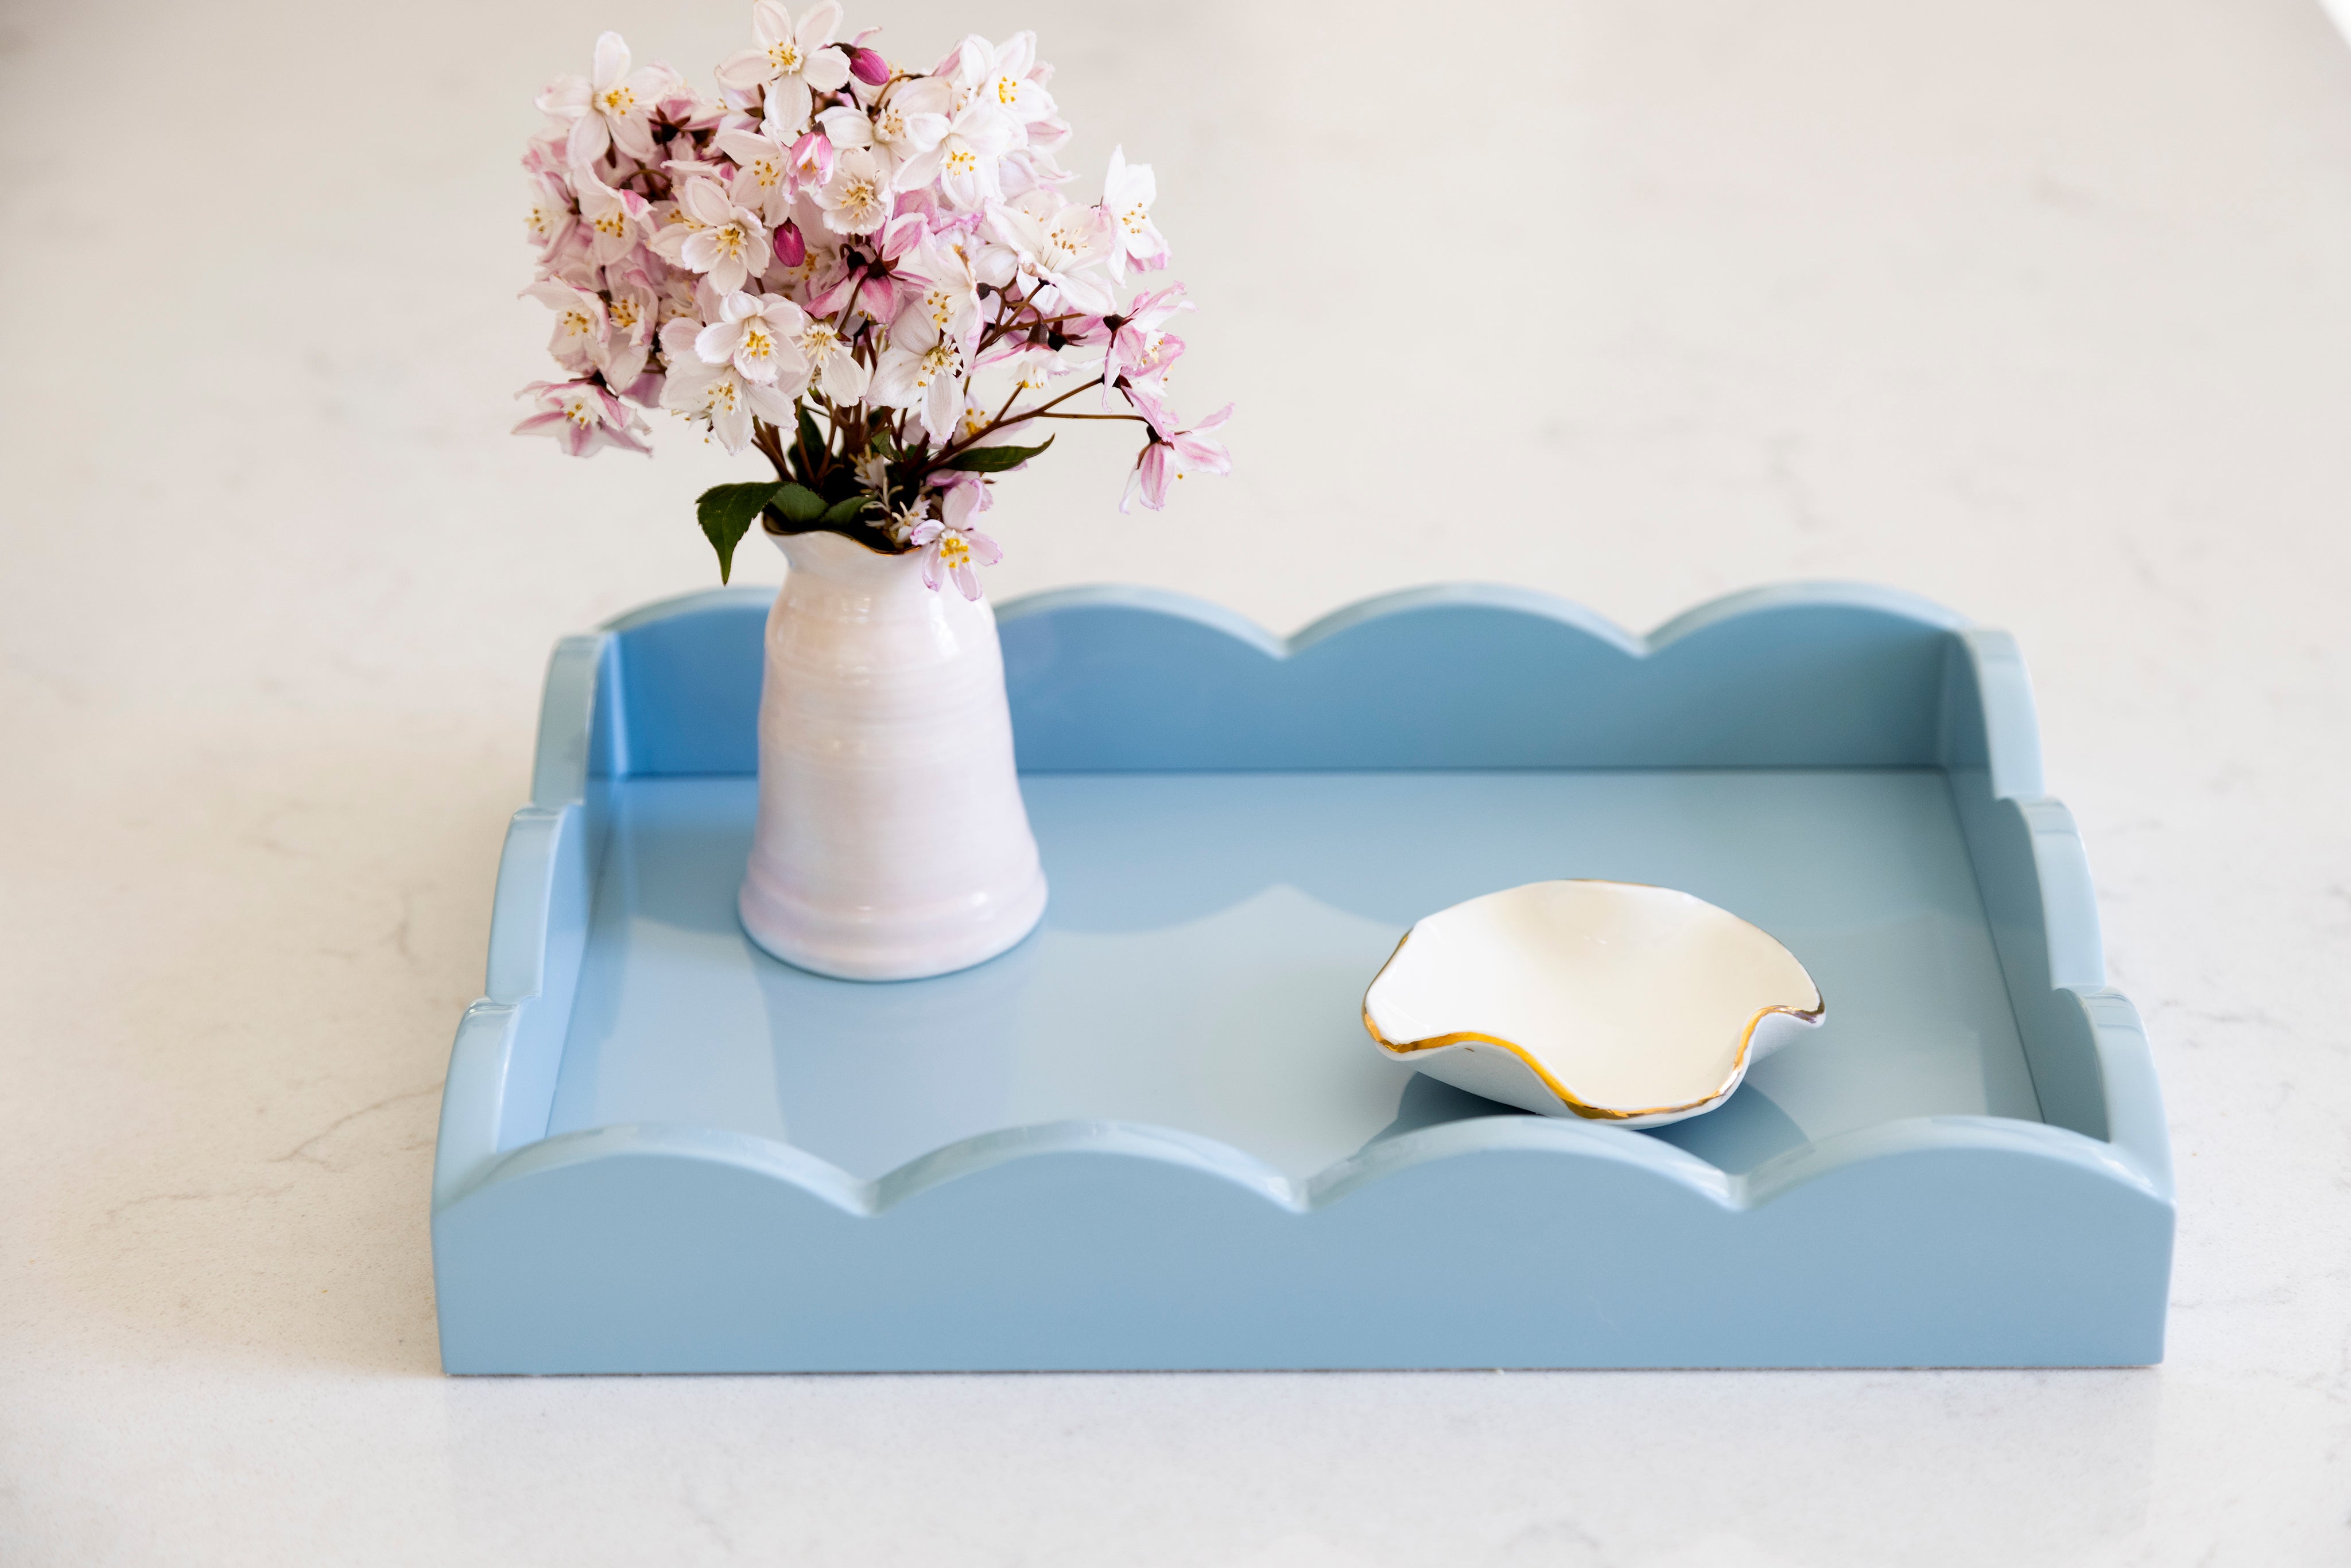 Small denim blue scalloped tray with Joanna ling bud vase and trinket dish